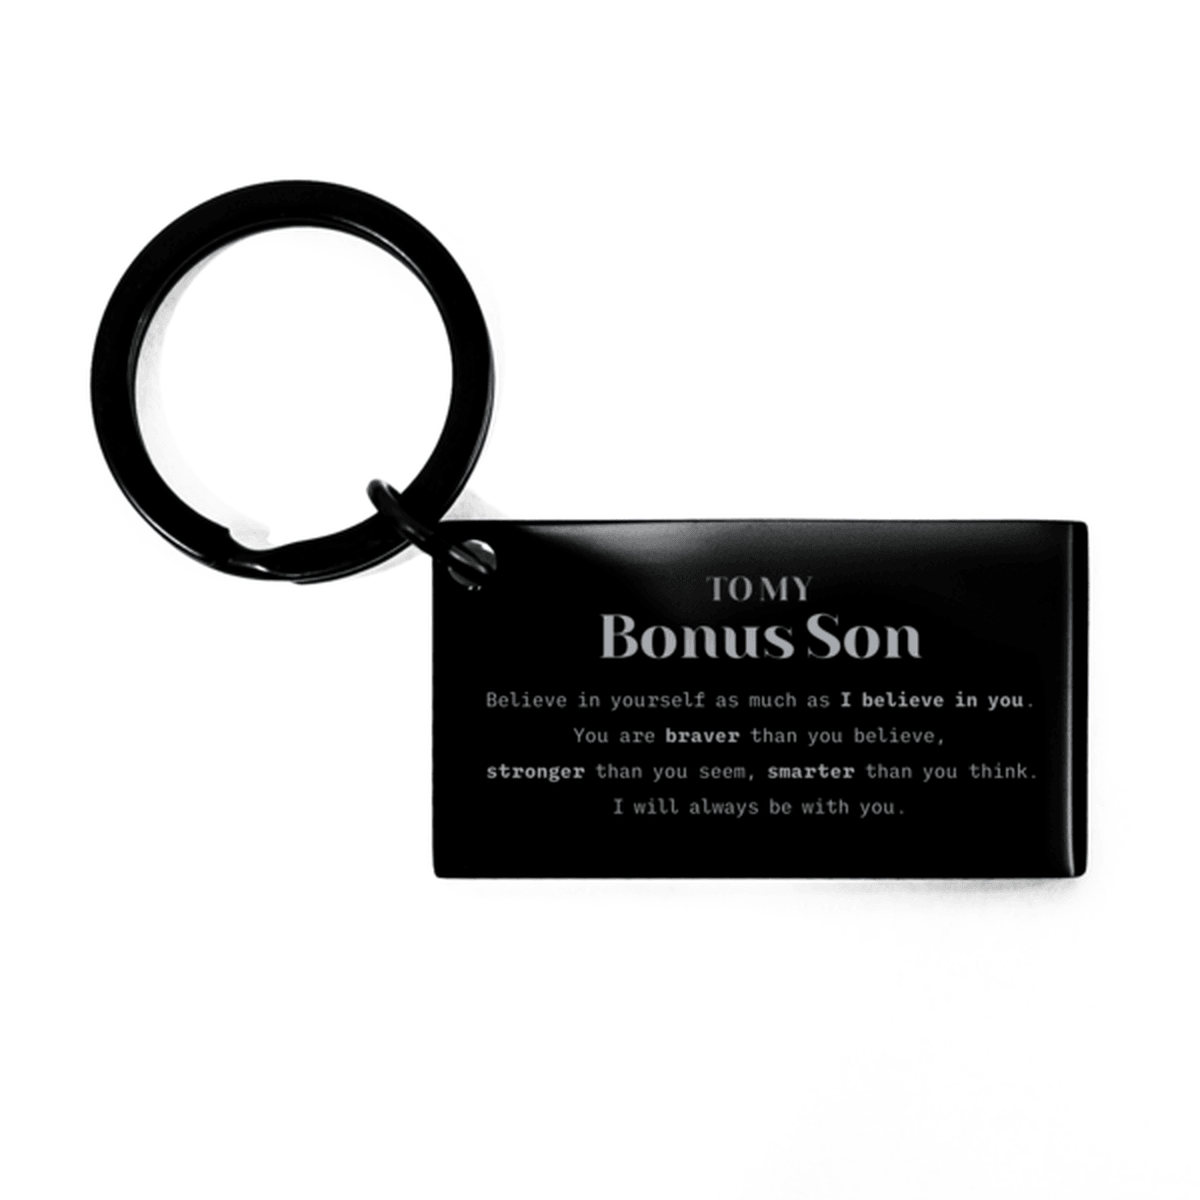 Bonus Son Keychain Gifts, To My Bonus Son You are braver than you believe, stronger than you seem, Inspirational Gifts For Bonus Son Engraved, Birthday, Christmas Gifts For Bonus Son Men Women - Mallard Moon Gift Shop